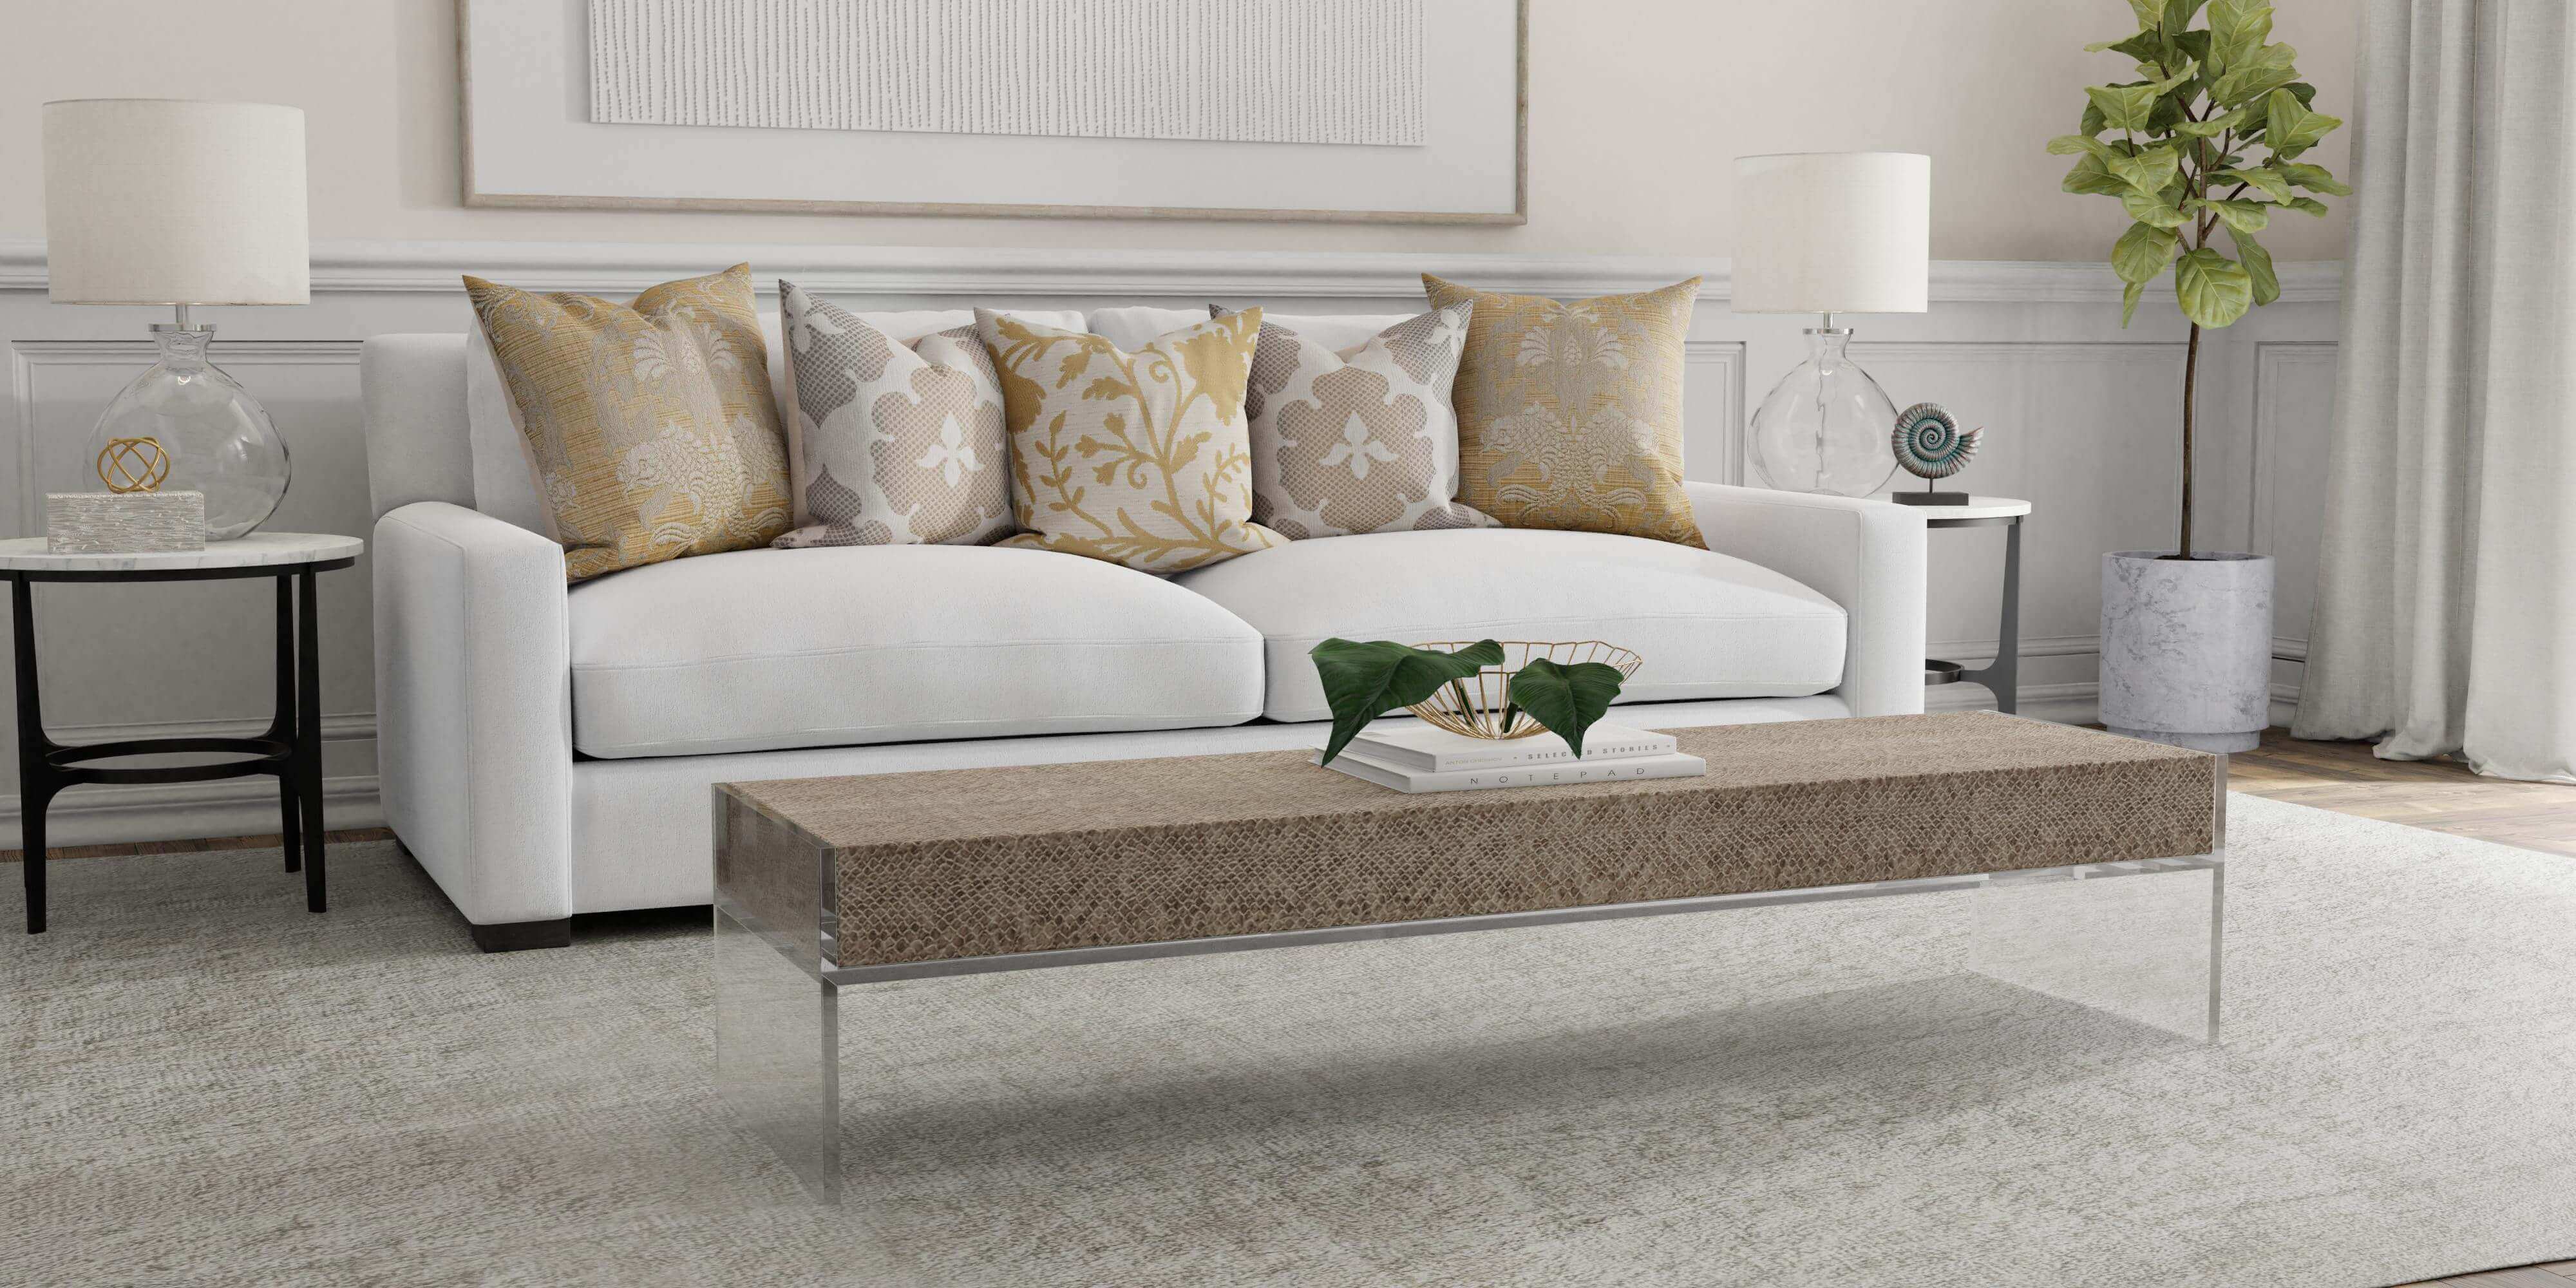 3D living room template with white and beige couch, pillows, rug, and added props made in imagine.io